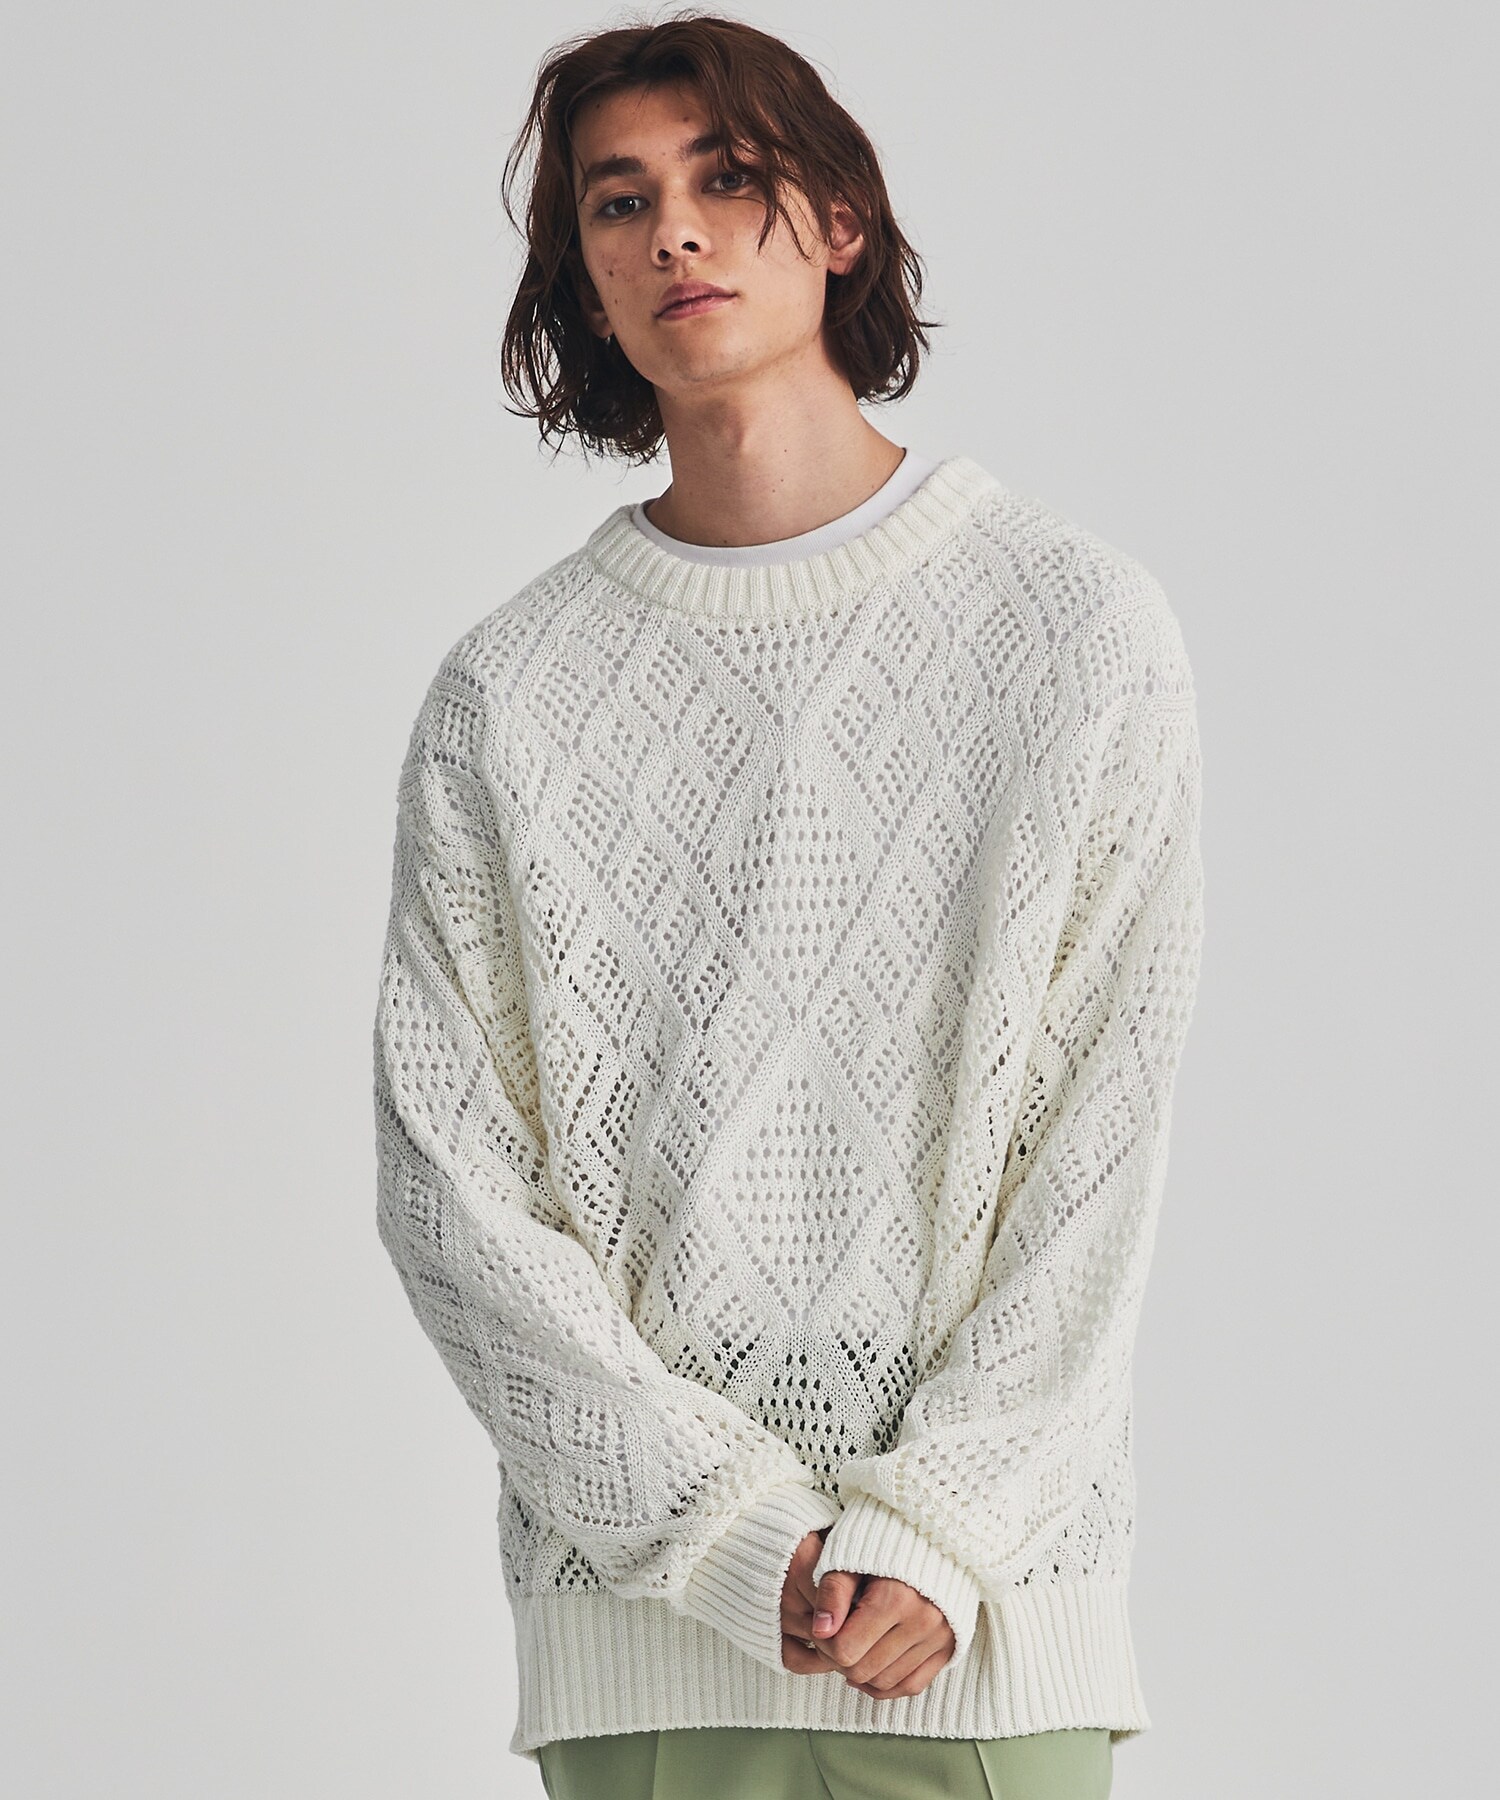 CROCHETED LACE PULLOVER KNIT